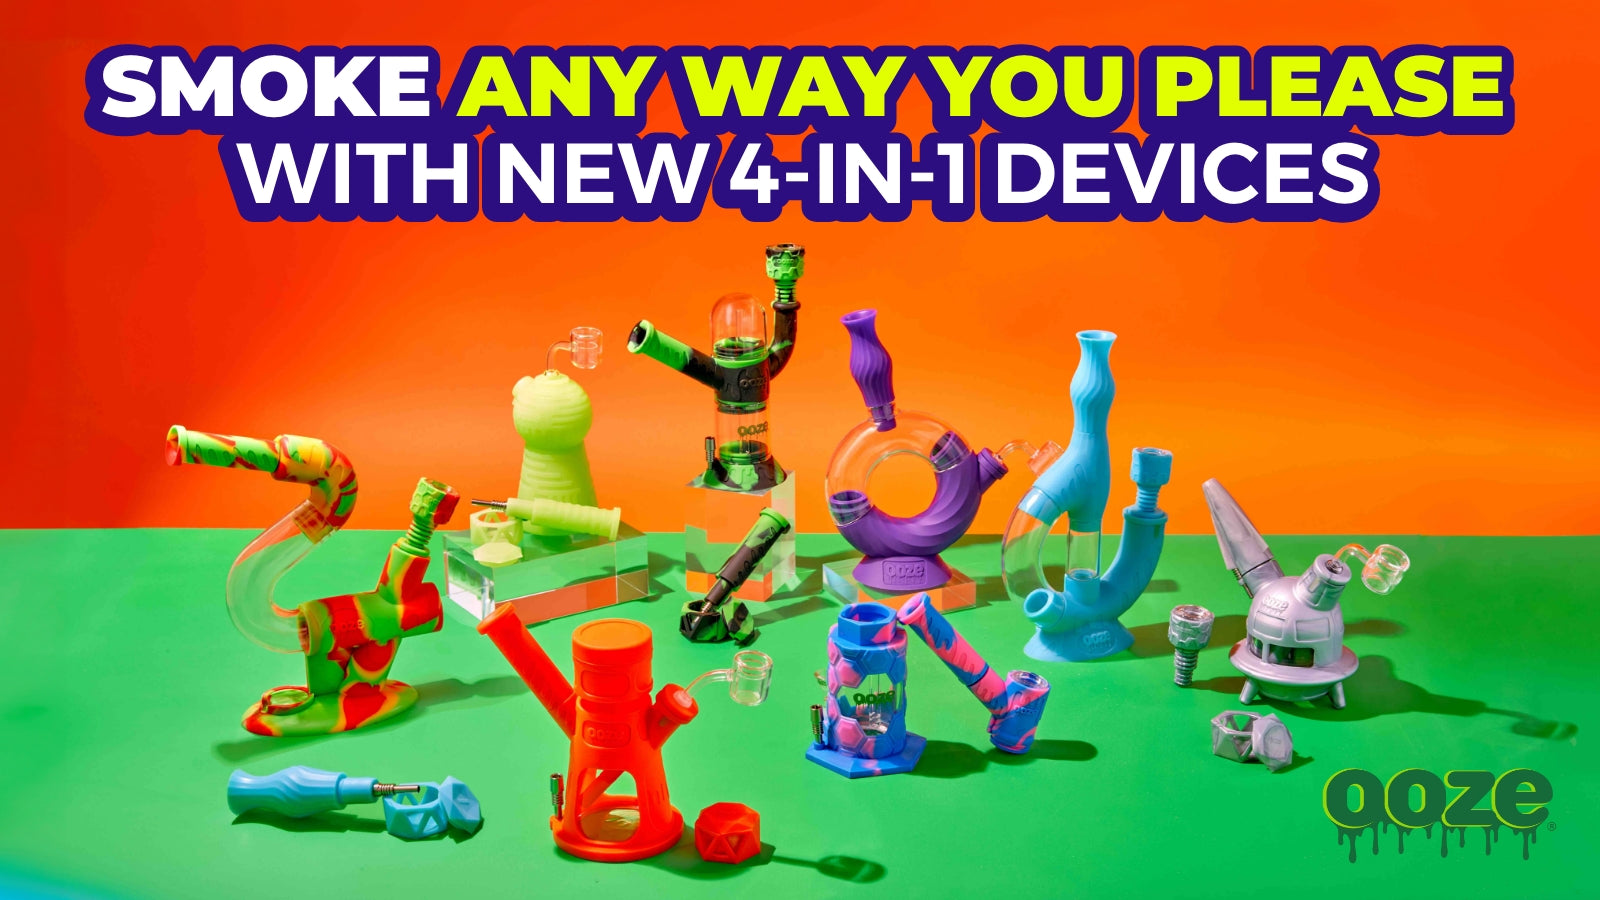 Smoke Any Way You Please With New 4-in-1 Devices!